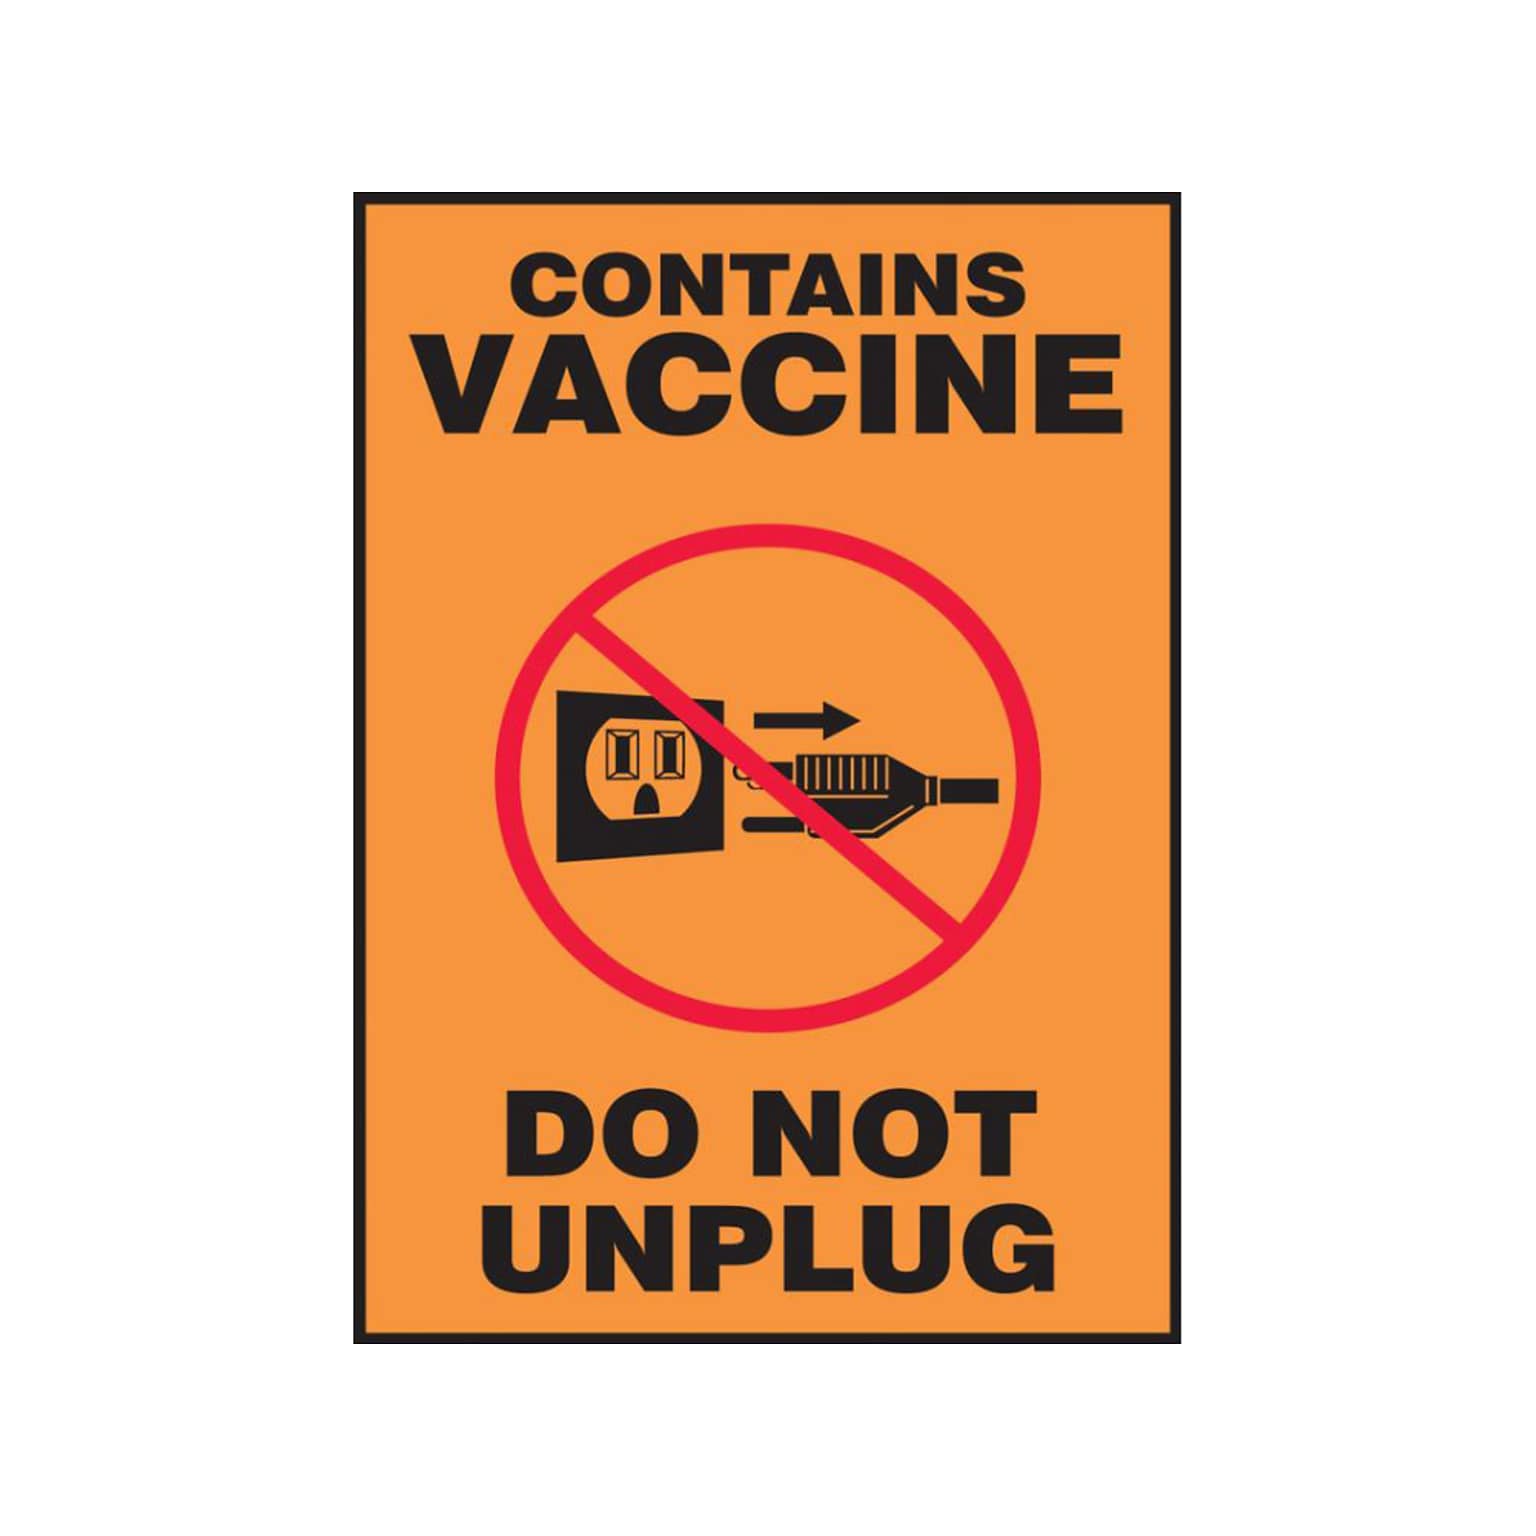 Accuform Contains Vaccine Do Not Unplug Adhesive Surface Safety Label, 5 x 7, Orange/Black/Red (MBDX508VS)